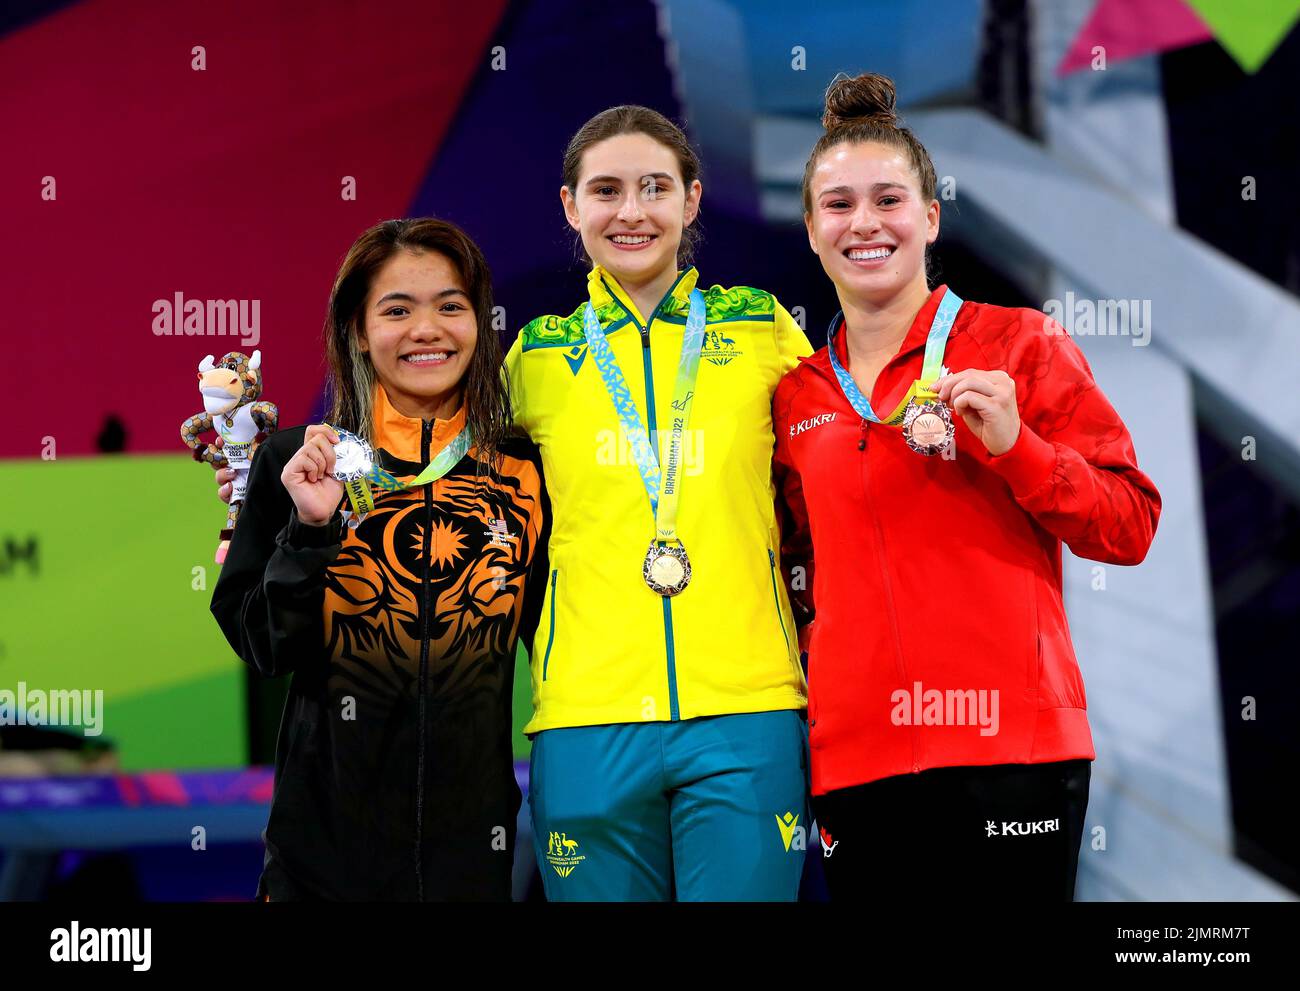 Australia's Maddison Keeney (centre) celebrates with her gold medal alongside Malaysia's Nur Dhabitah Binti Sabri (left), who finished second to take silver and Canada's Mia Jolie Doucet Vallee, who took bronze in the Women's 3m Springboard Diving Final at Sandwell Aquatics Centre on day ten of the 2022 Commonwealth Games in Birmingham. Picture date: Sunday August 7, 2022. Stock Photo